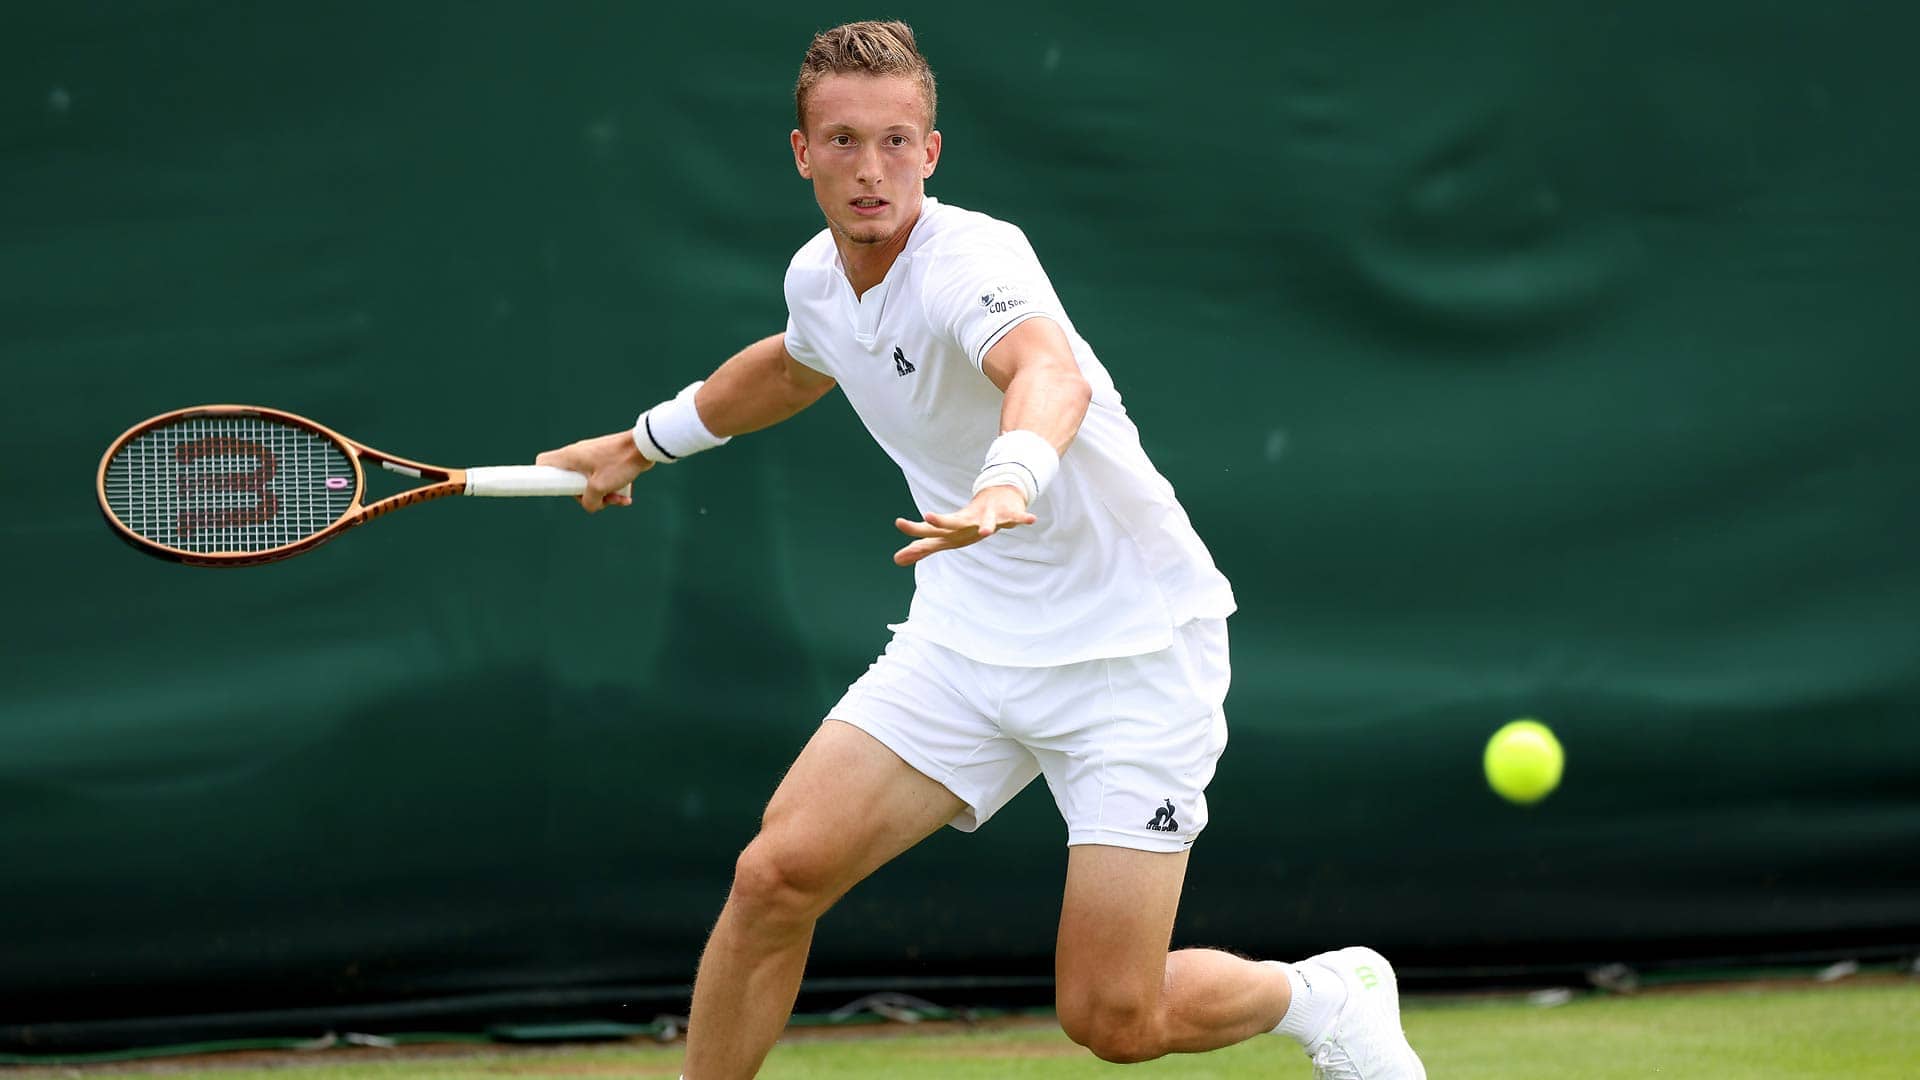 Jiri Lehecka defeats Tommy Paul in five sets Saturday at Wimbledon to reach the fourth round of a major for the second time.